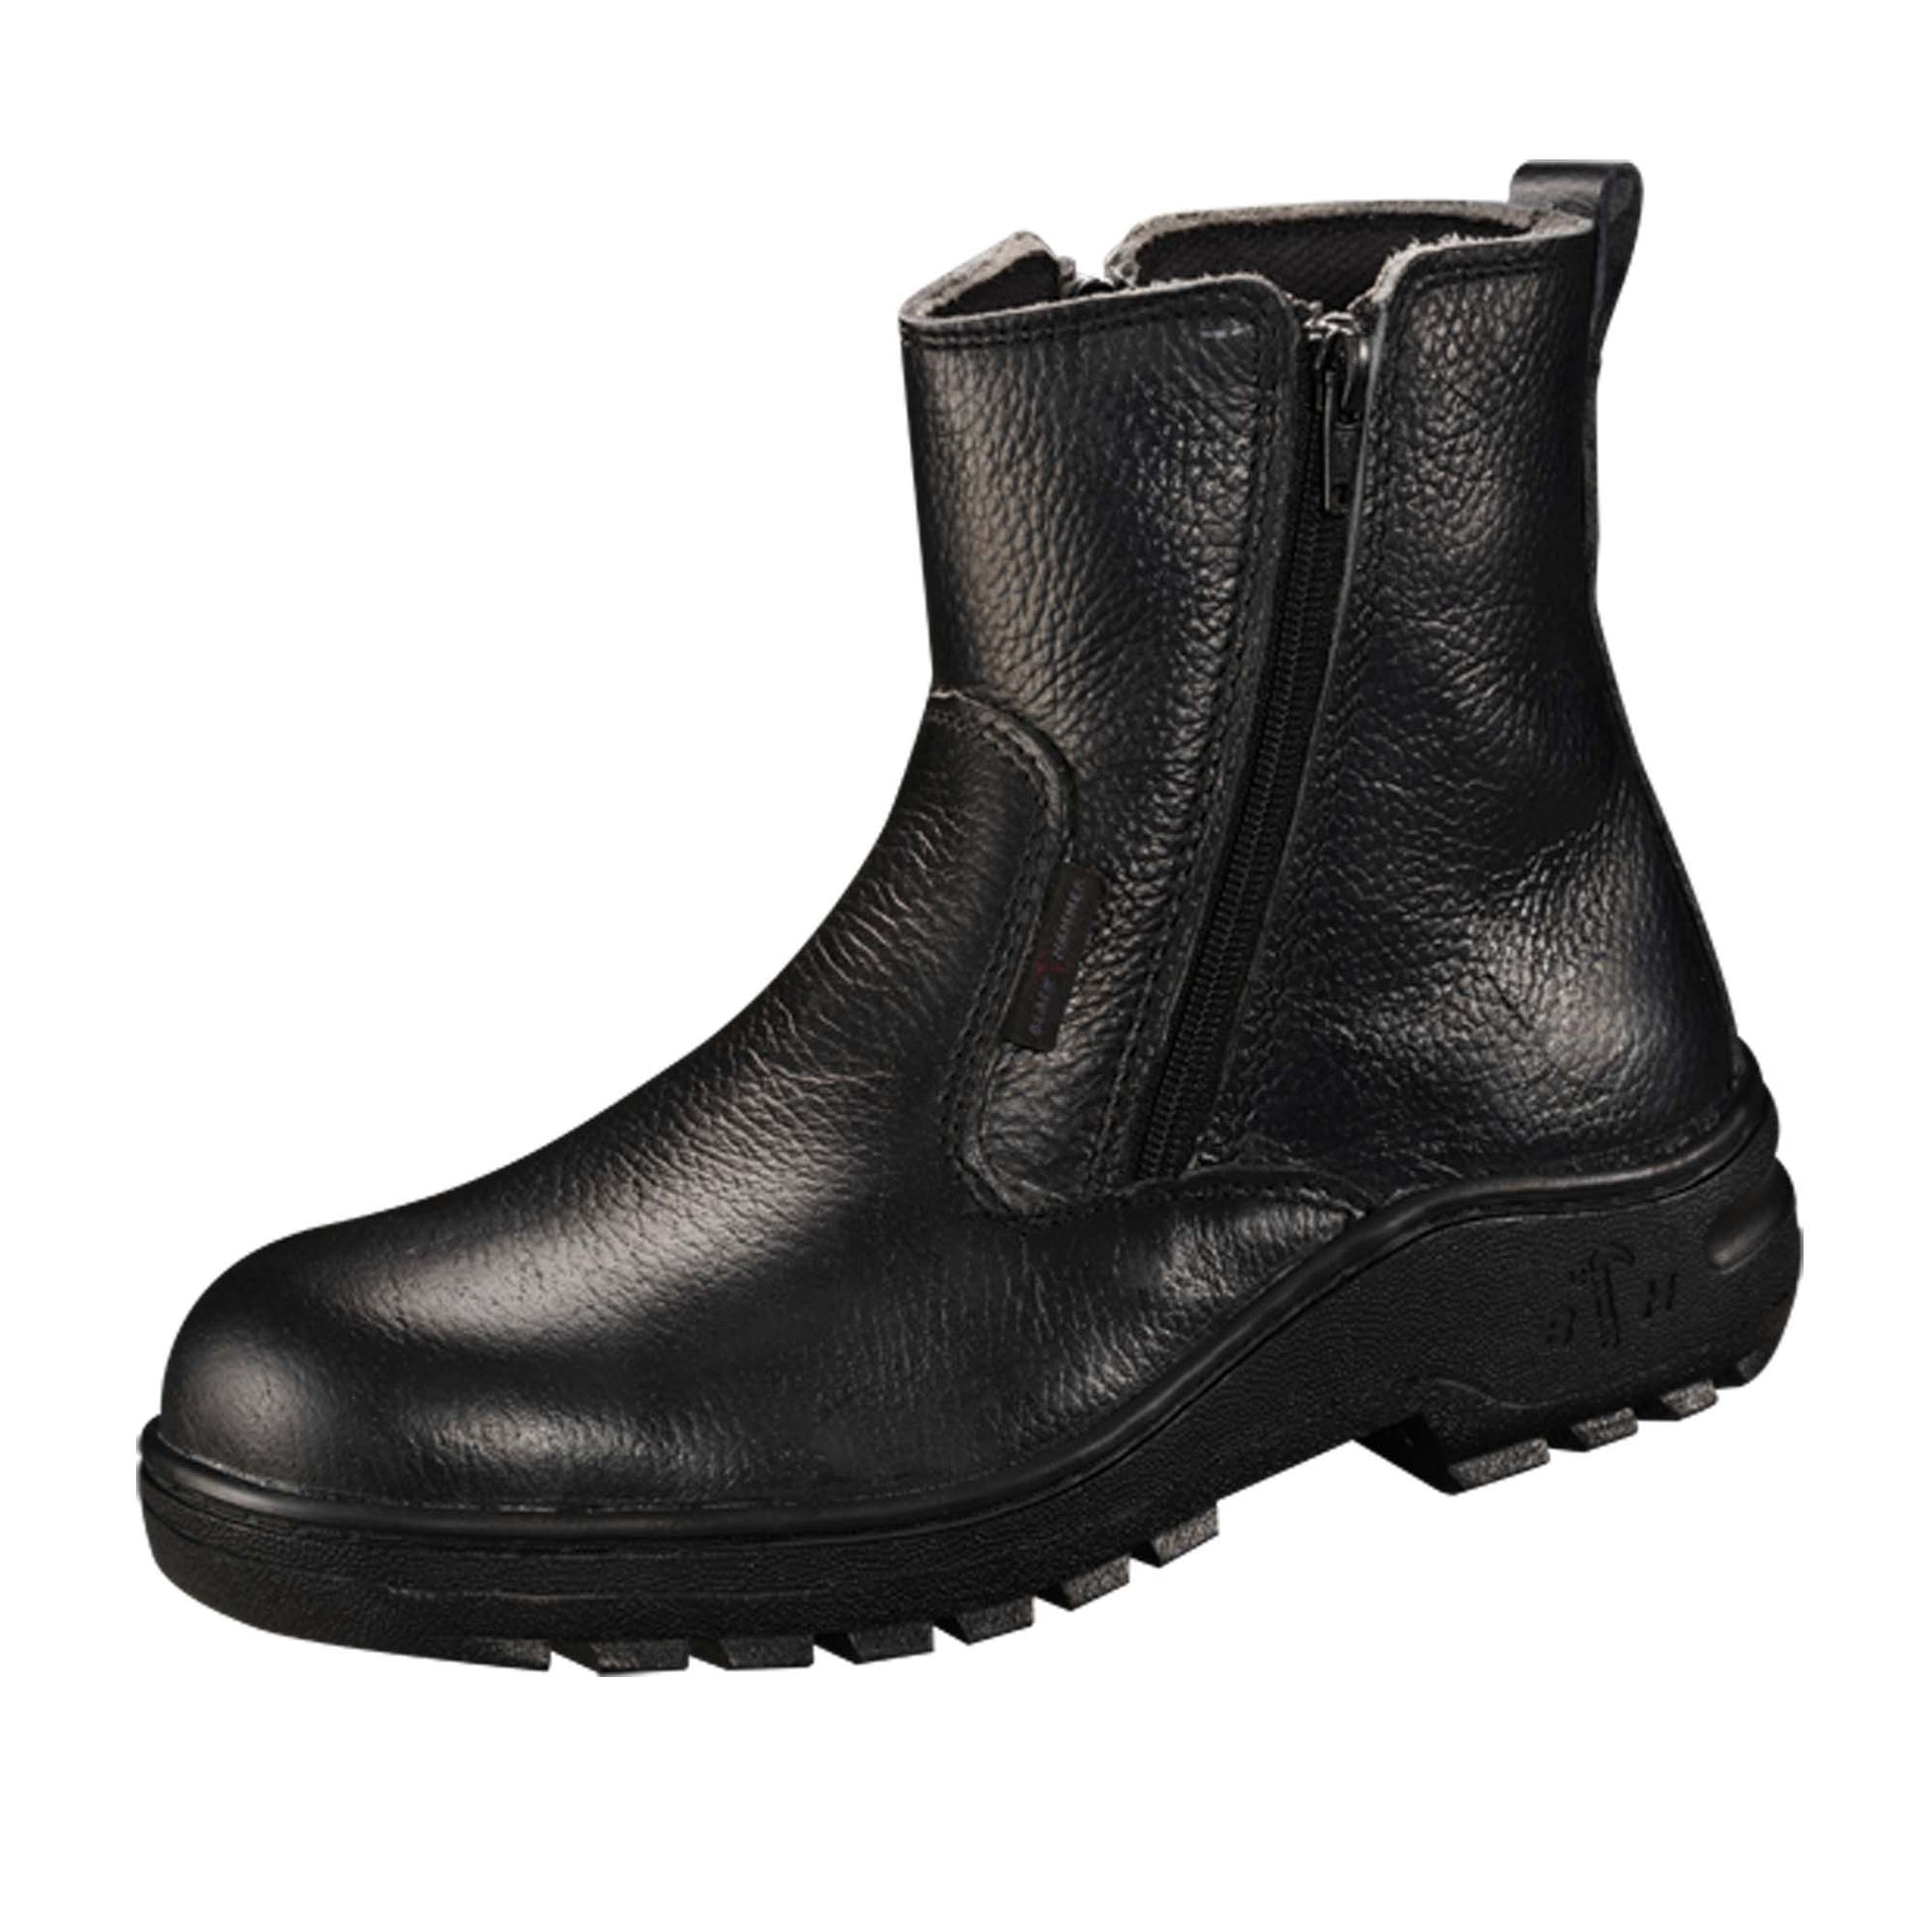 Black Hammer Men 2000 Series BH 2333- All Black & Double Zip Mid Cut Men Safety Shoes, SIRIM & DOSH Approved Safety Shoes